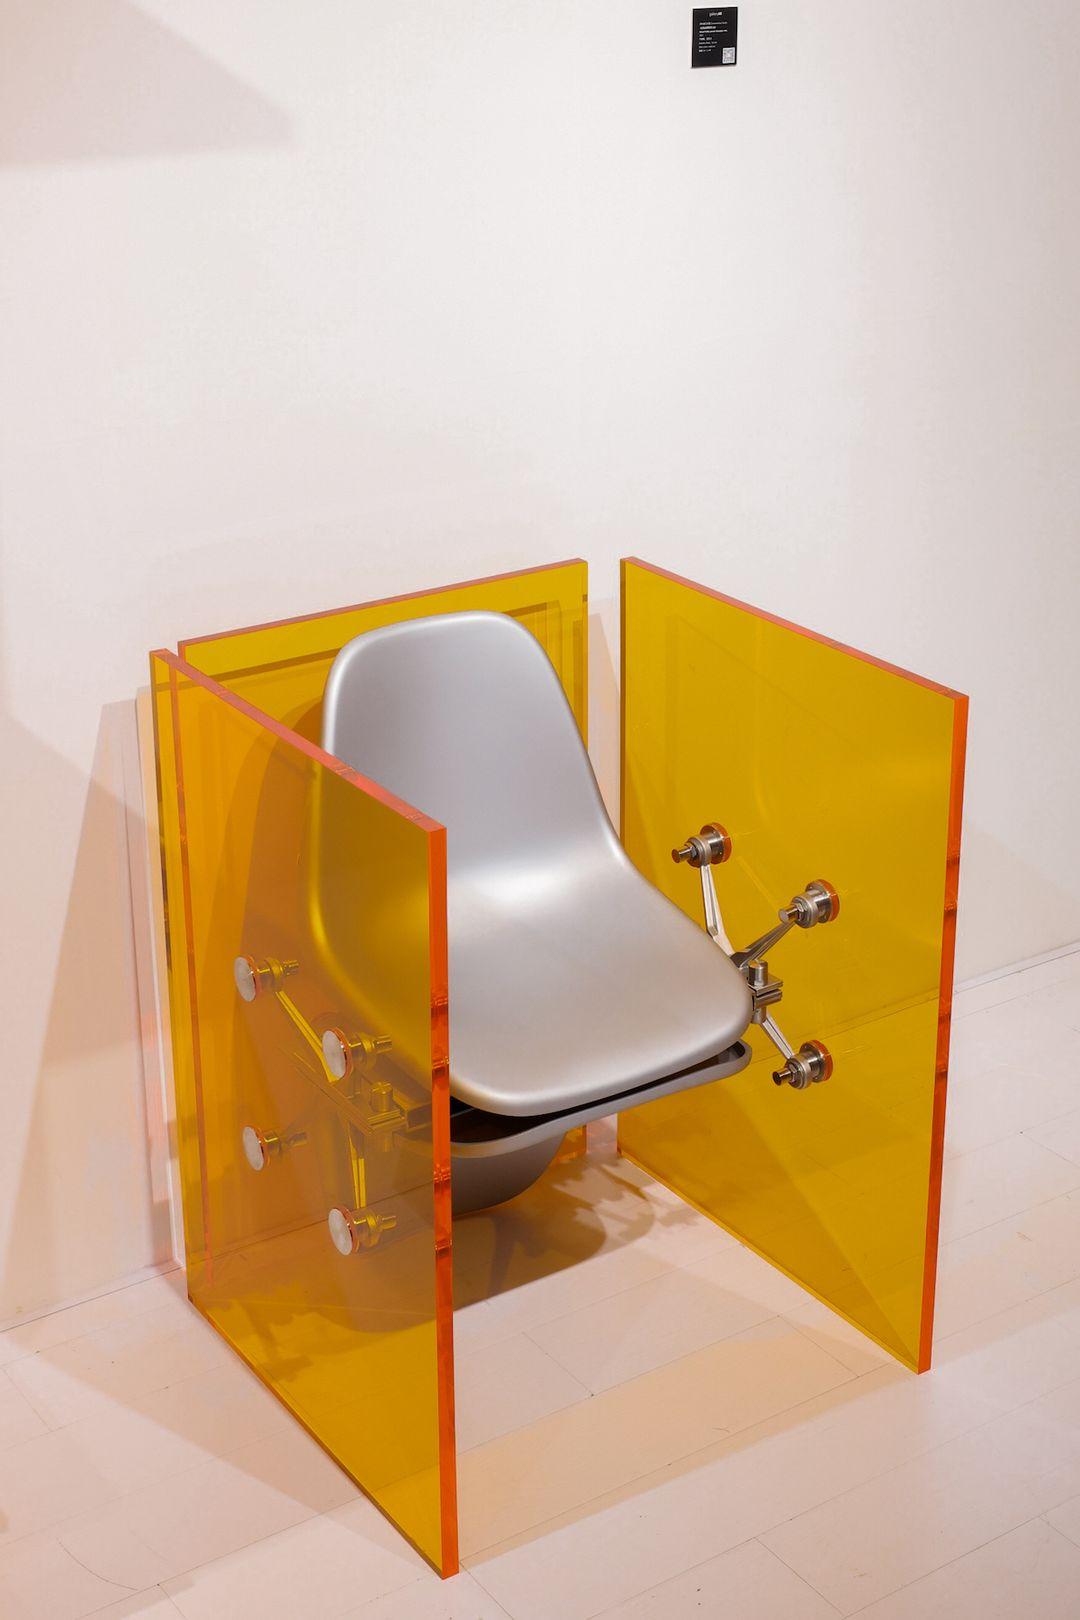 Chinese Mixed Public-Private Boundary #03 Orange Chair/Side Table by Cometabolism Studio For Sale